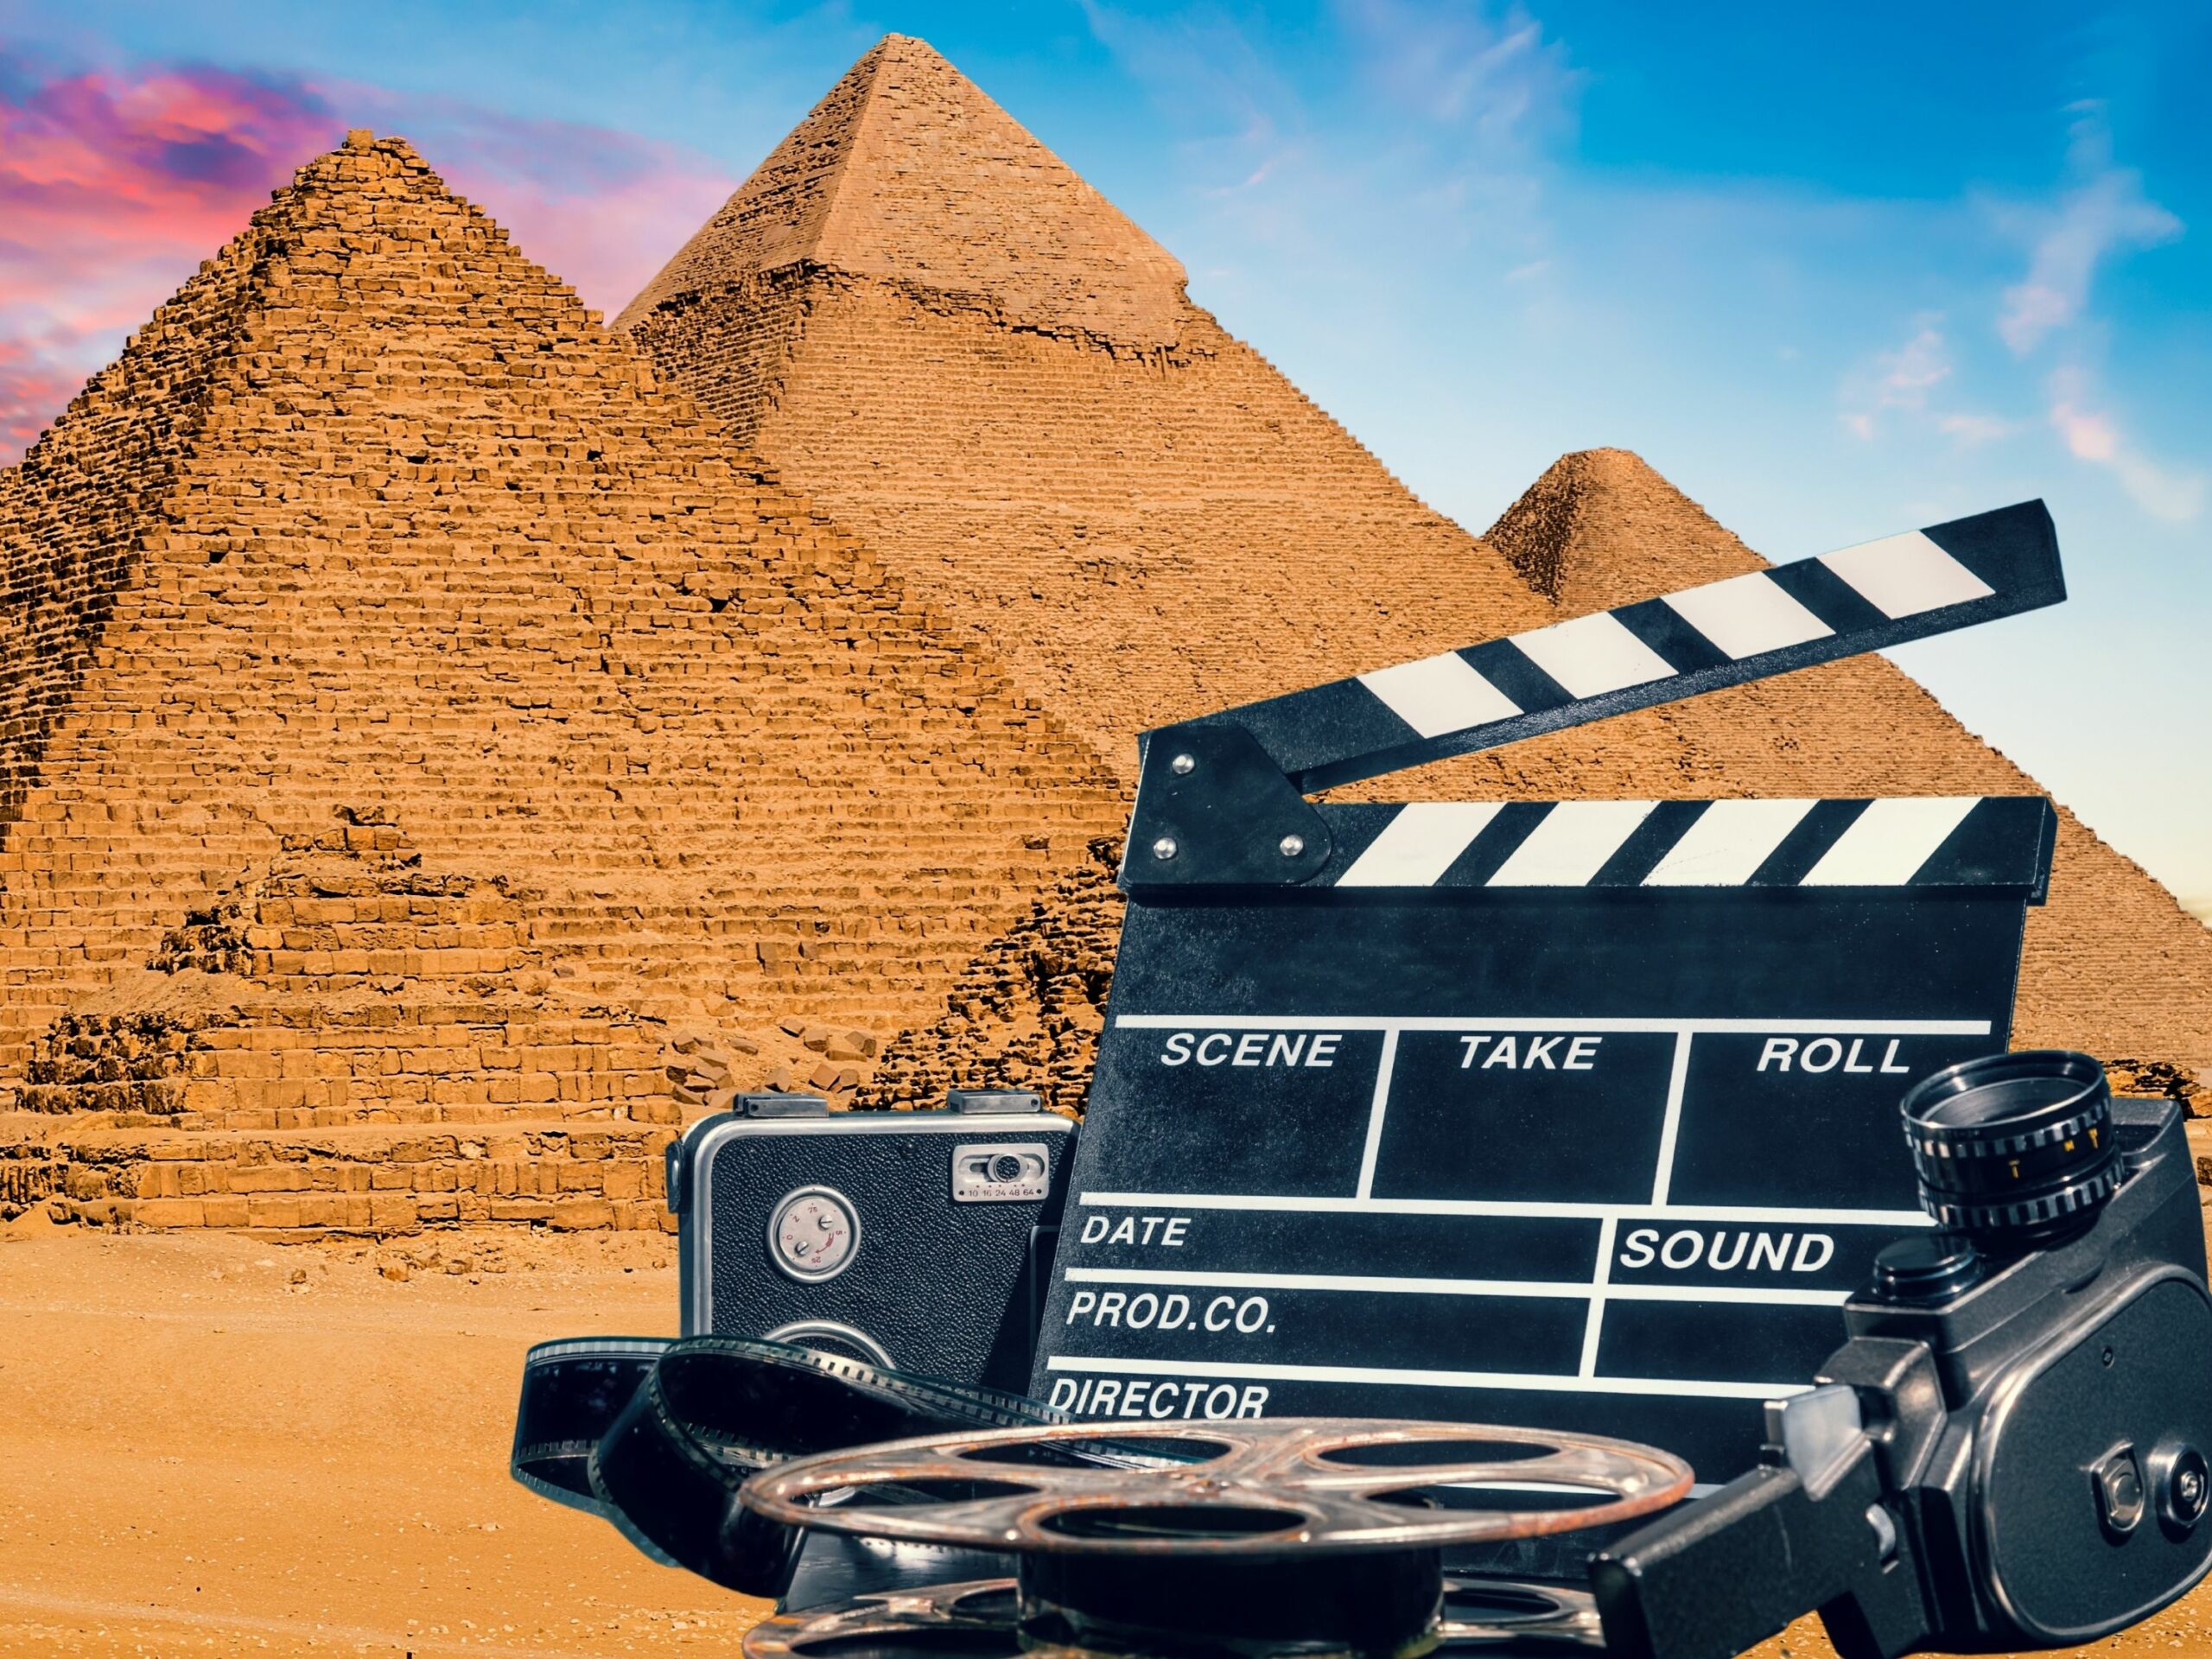 Extraordinary Movies Set In Egypt That Will Inspire You To Visit!